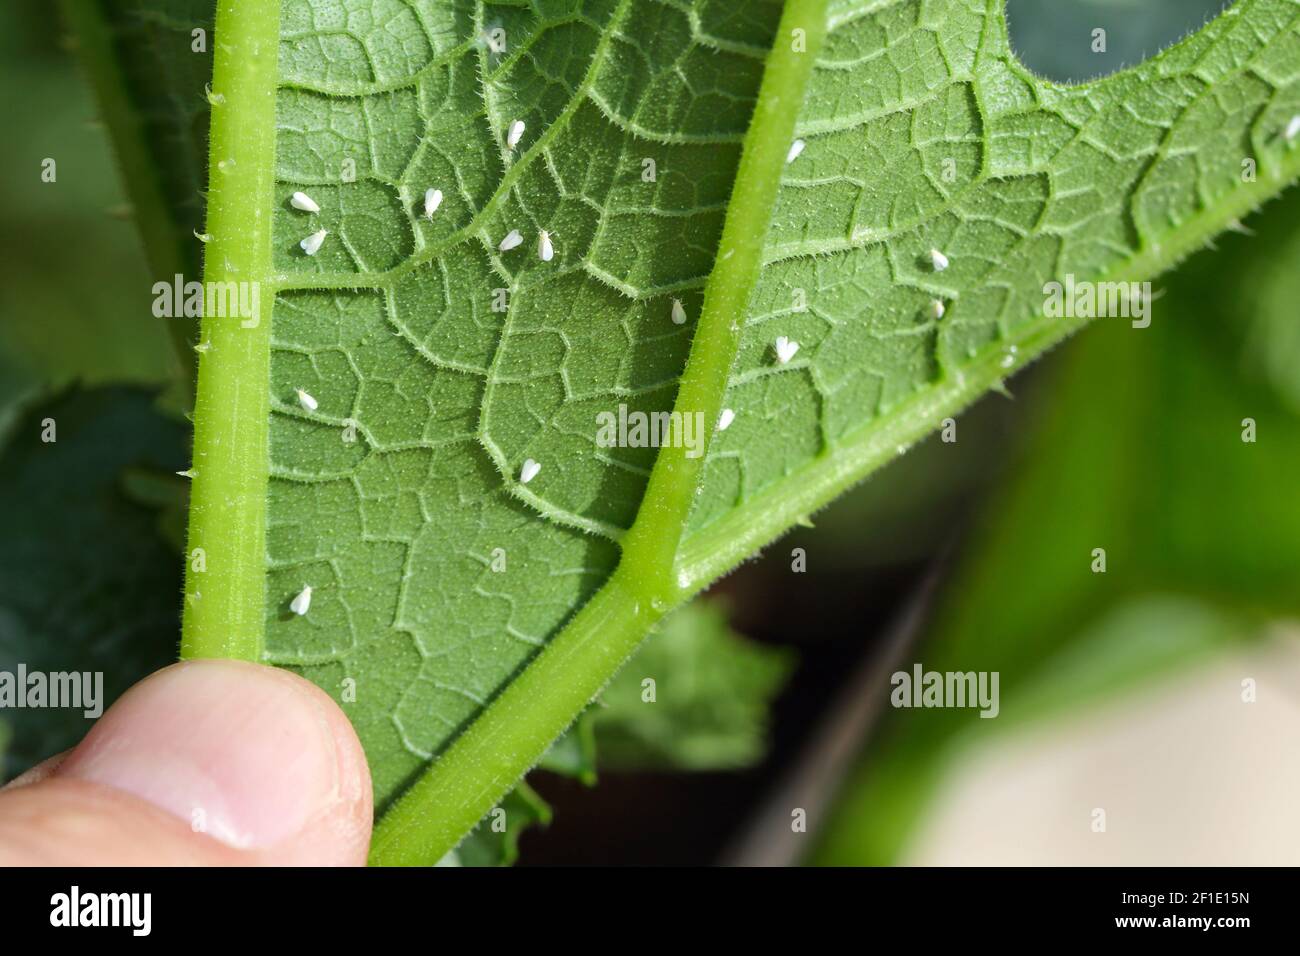 Silverleaf whitefly, Bemisia tabaci (Hemiptera: Aleyrodidae) is an important agricultural pest. Insects on the bottom of zucchini leaf. Stock Photo